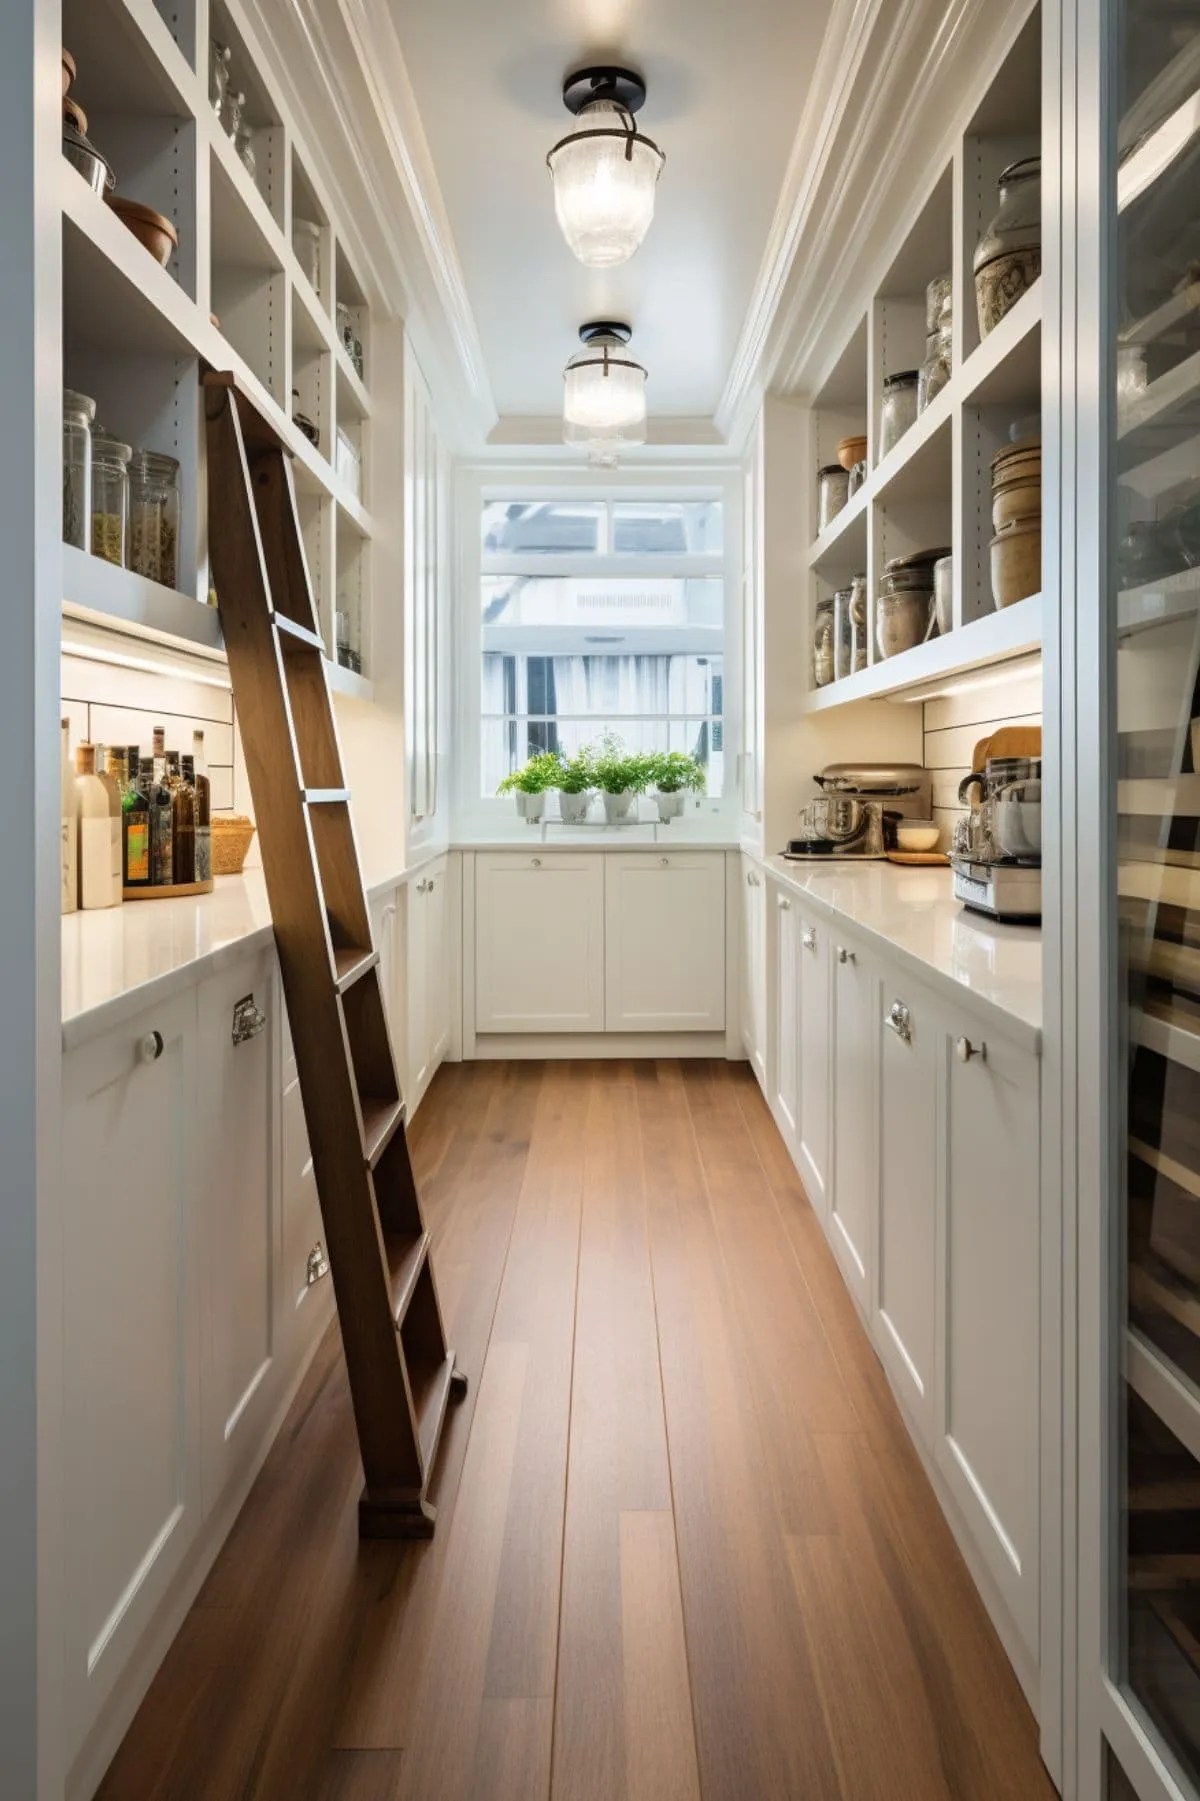 10 Walk-In Pantry Ideas – Designing the Perfect Storage for Your Kitchen